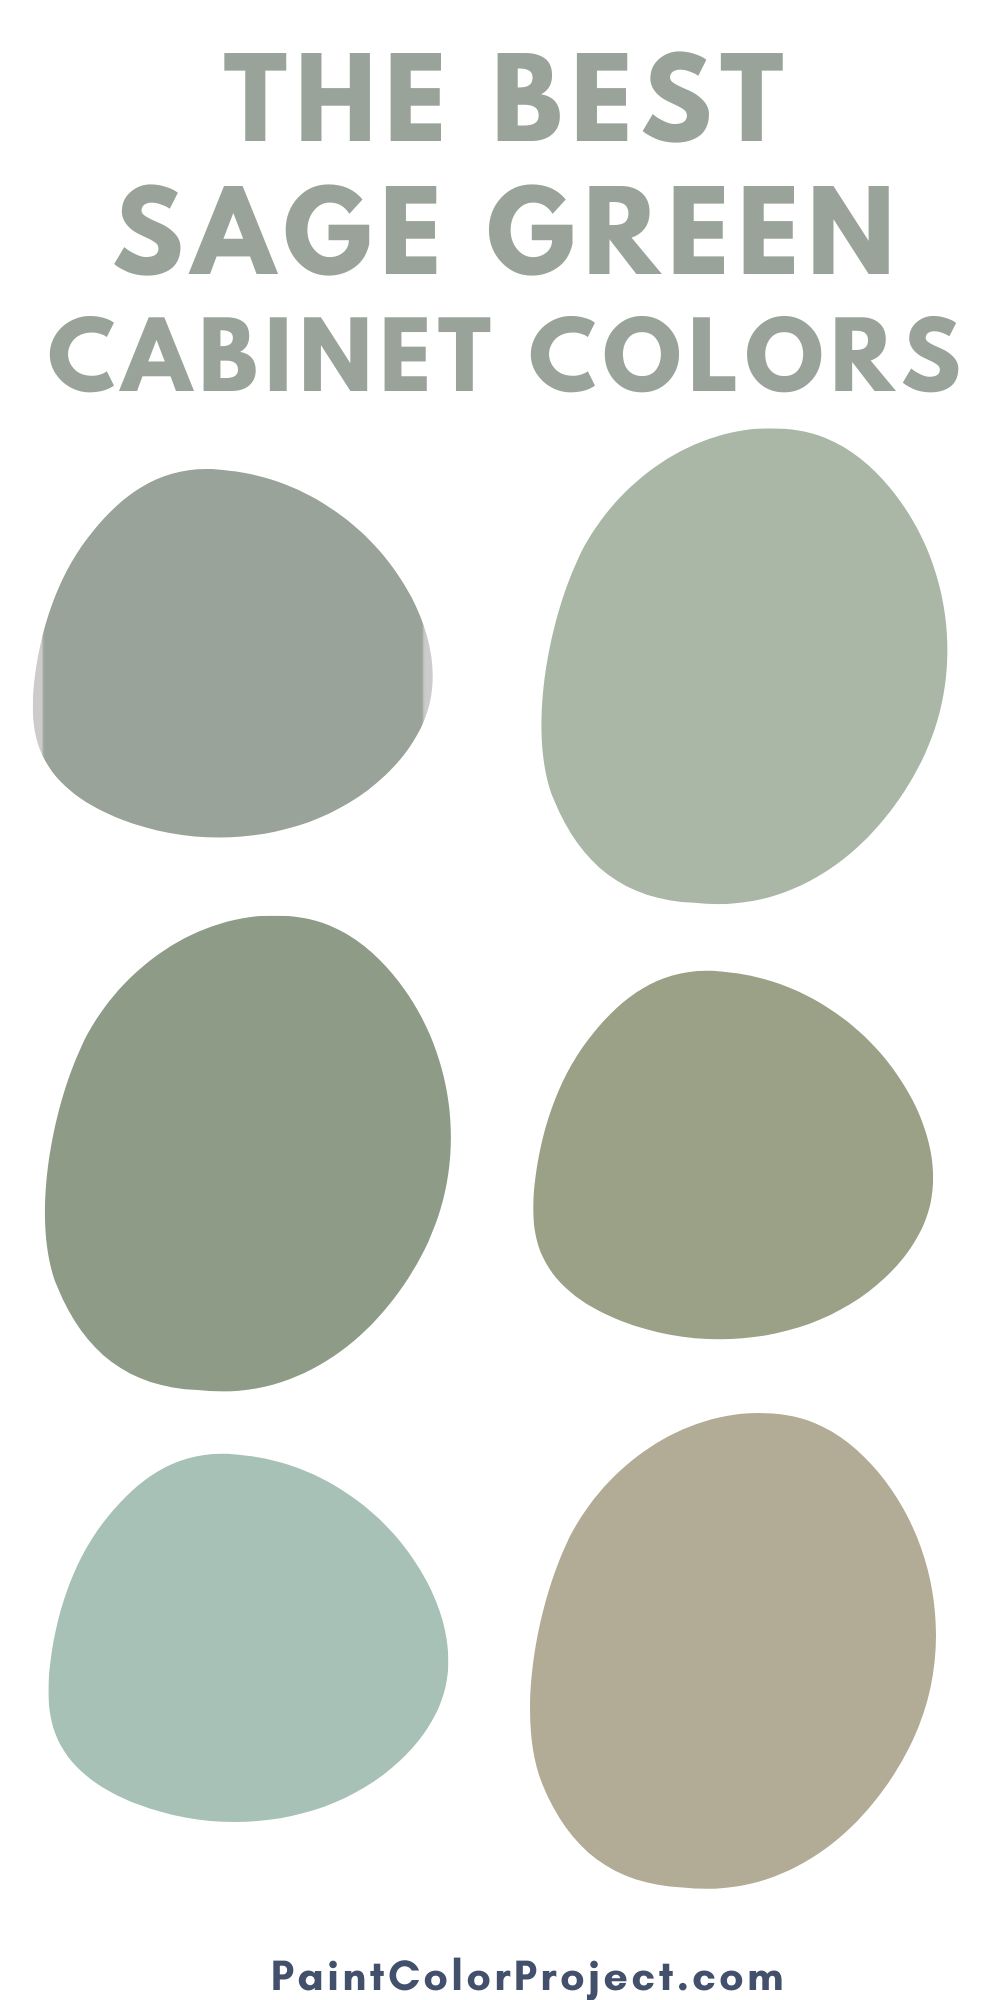 The 15 Best Sage Green Paint Colors for Cabinets for 2022 - The Paint ...